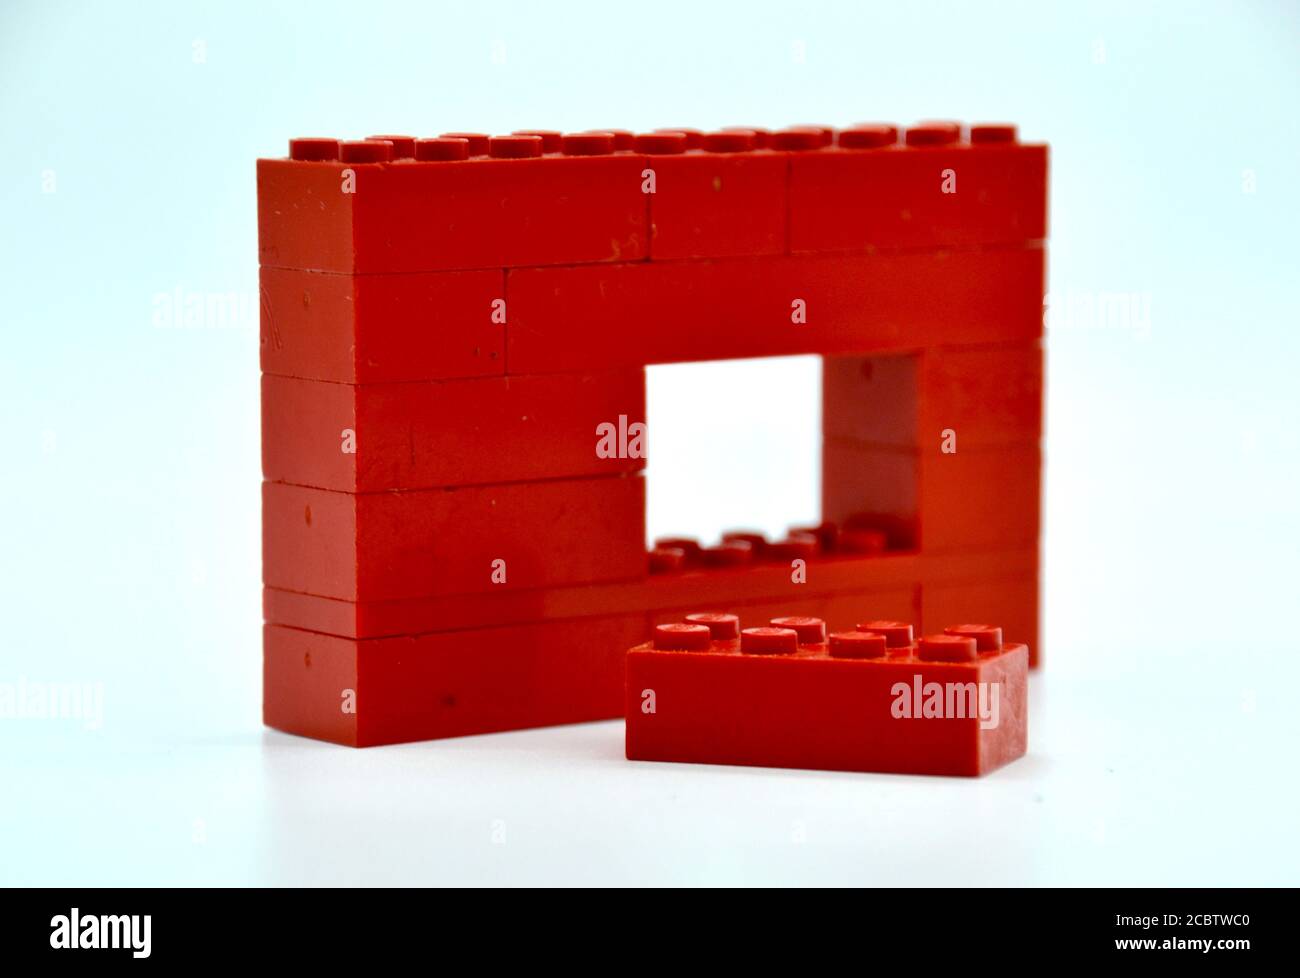 Single Red Lego Block Brick Stock Photo - Download Image Now